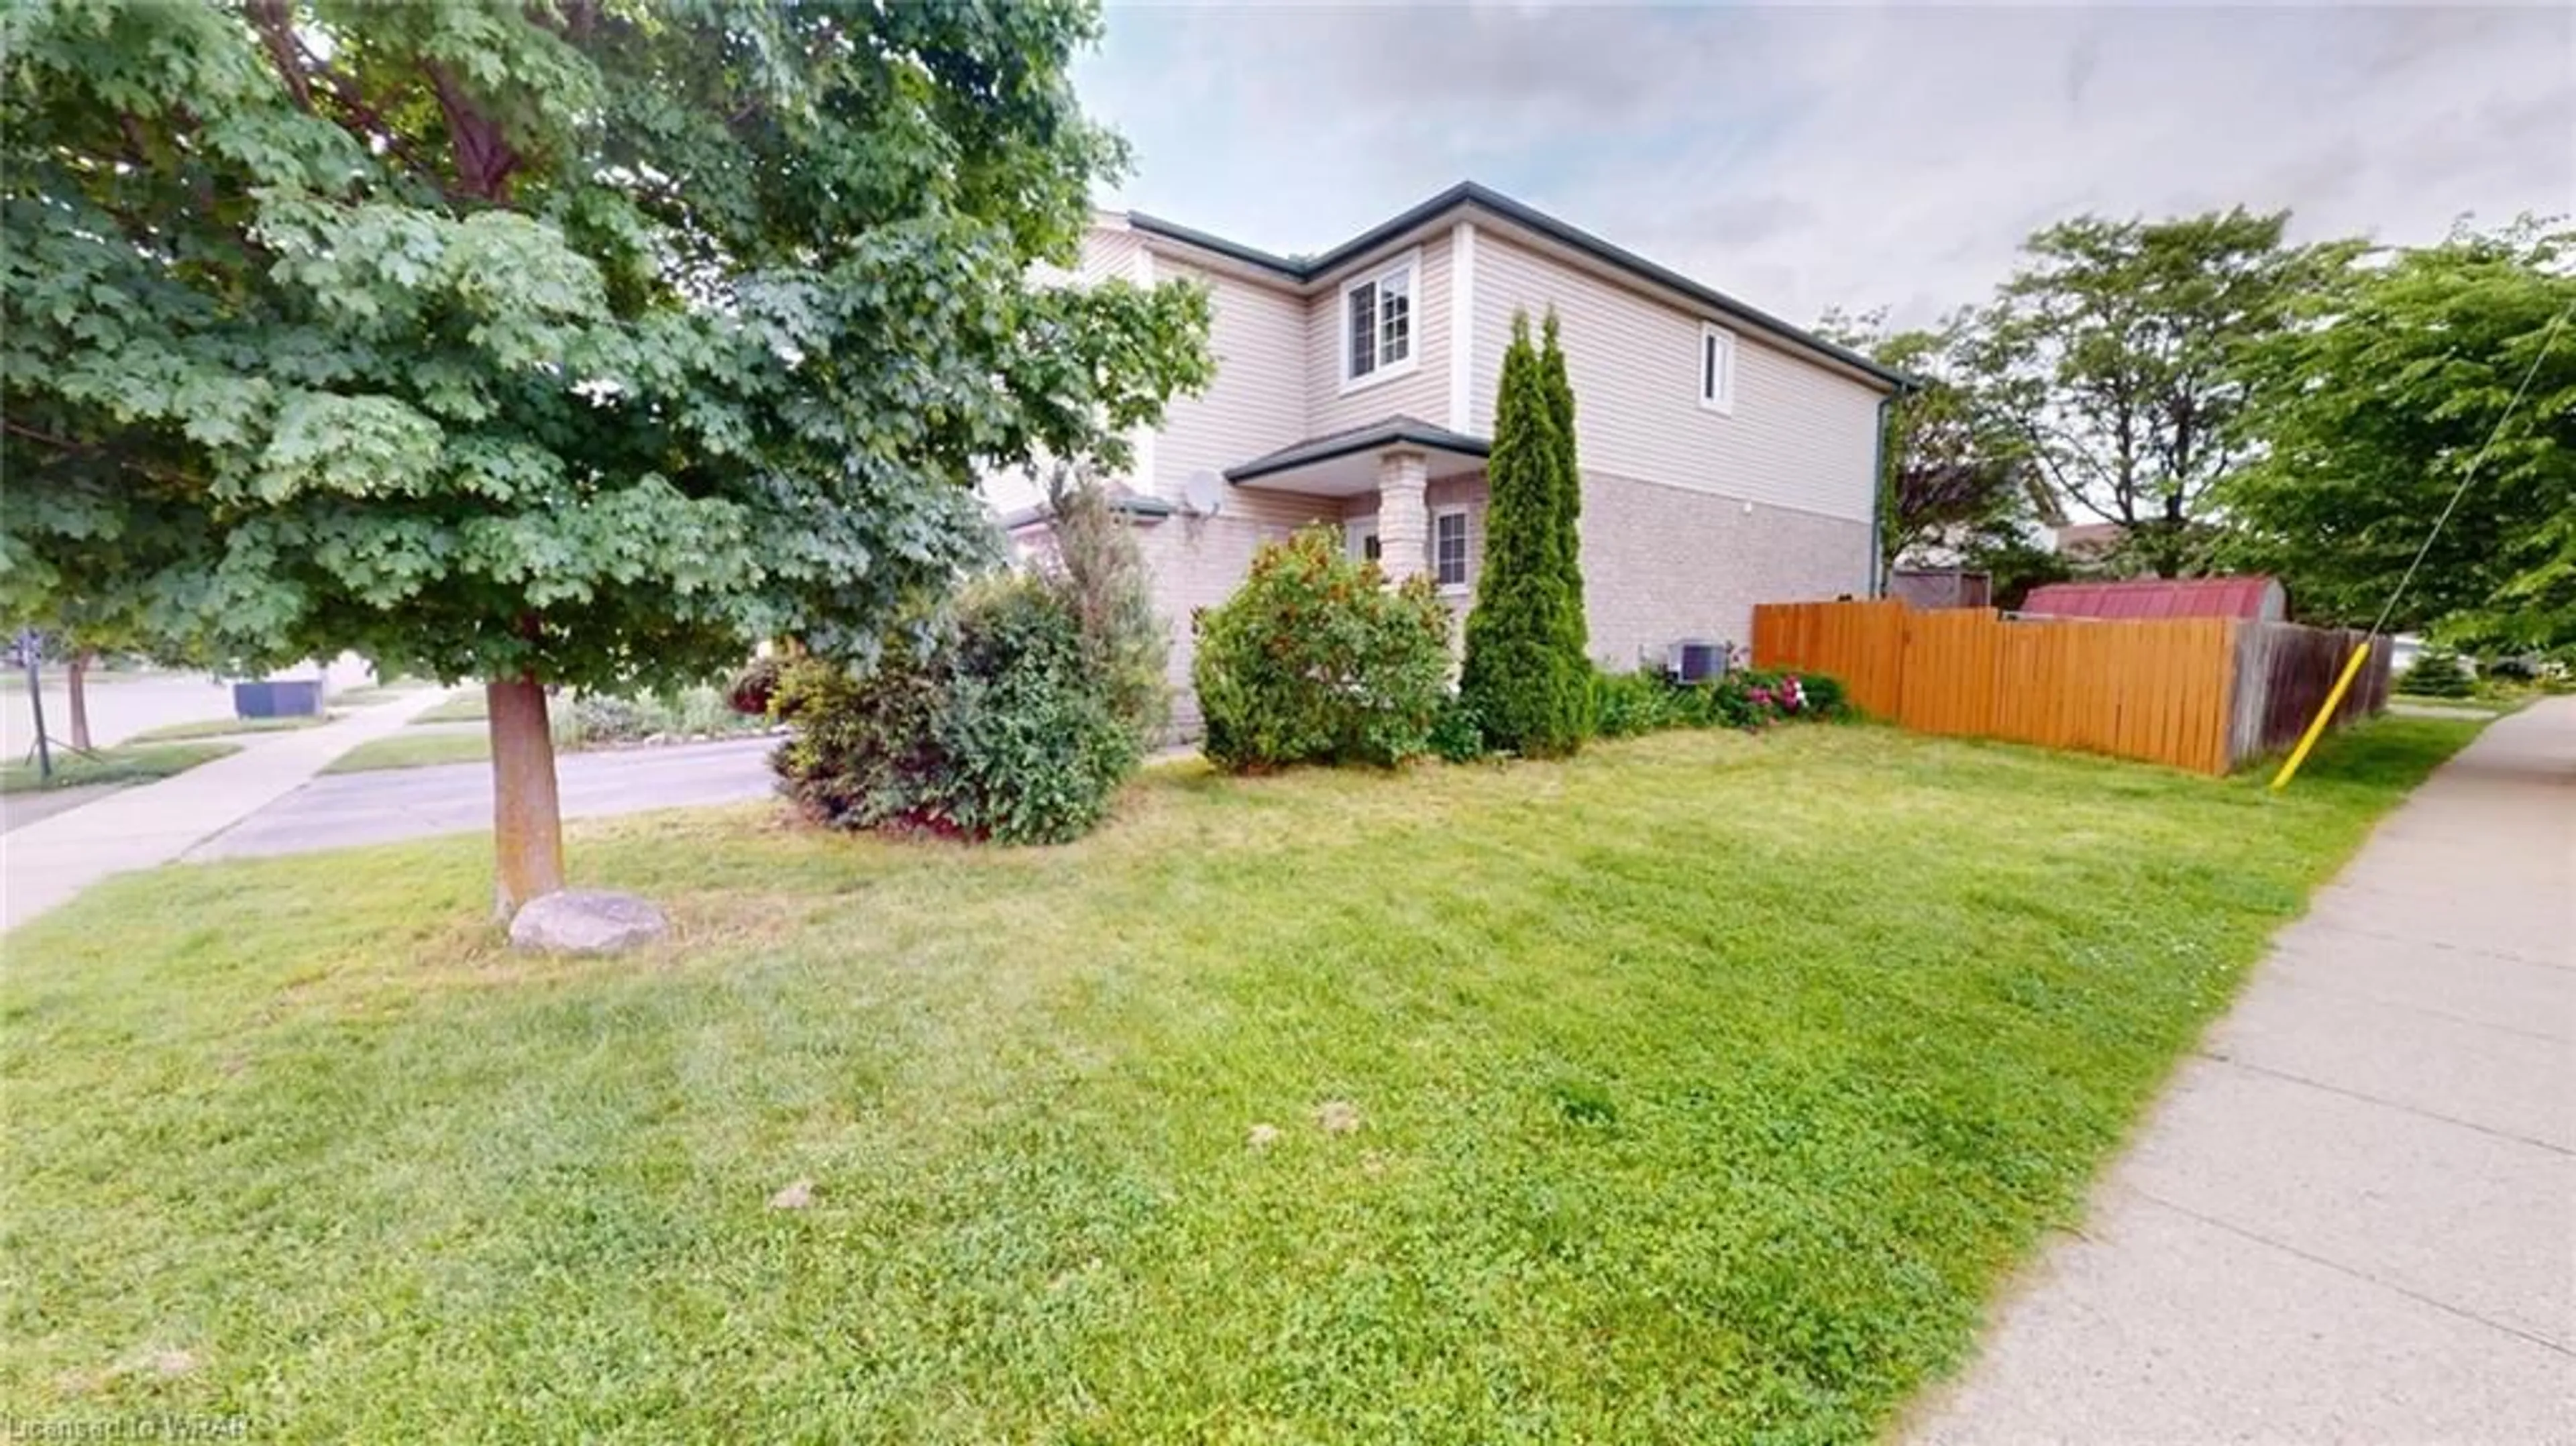 Fenced yard for 448 Harbour View Cres #B, Waterloo Ontario N2K 4A3